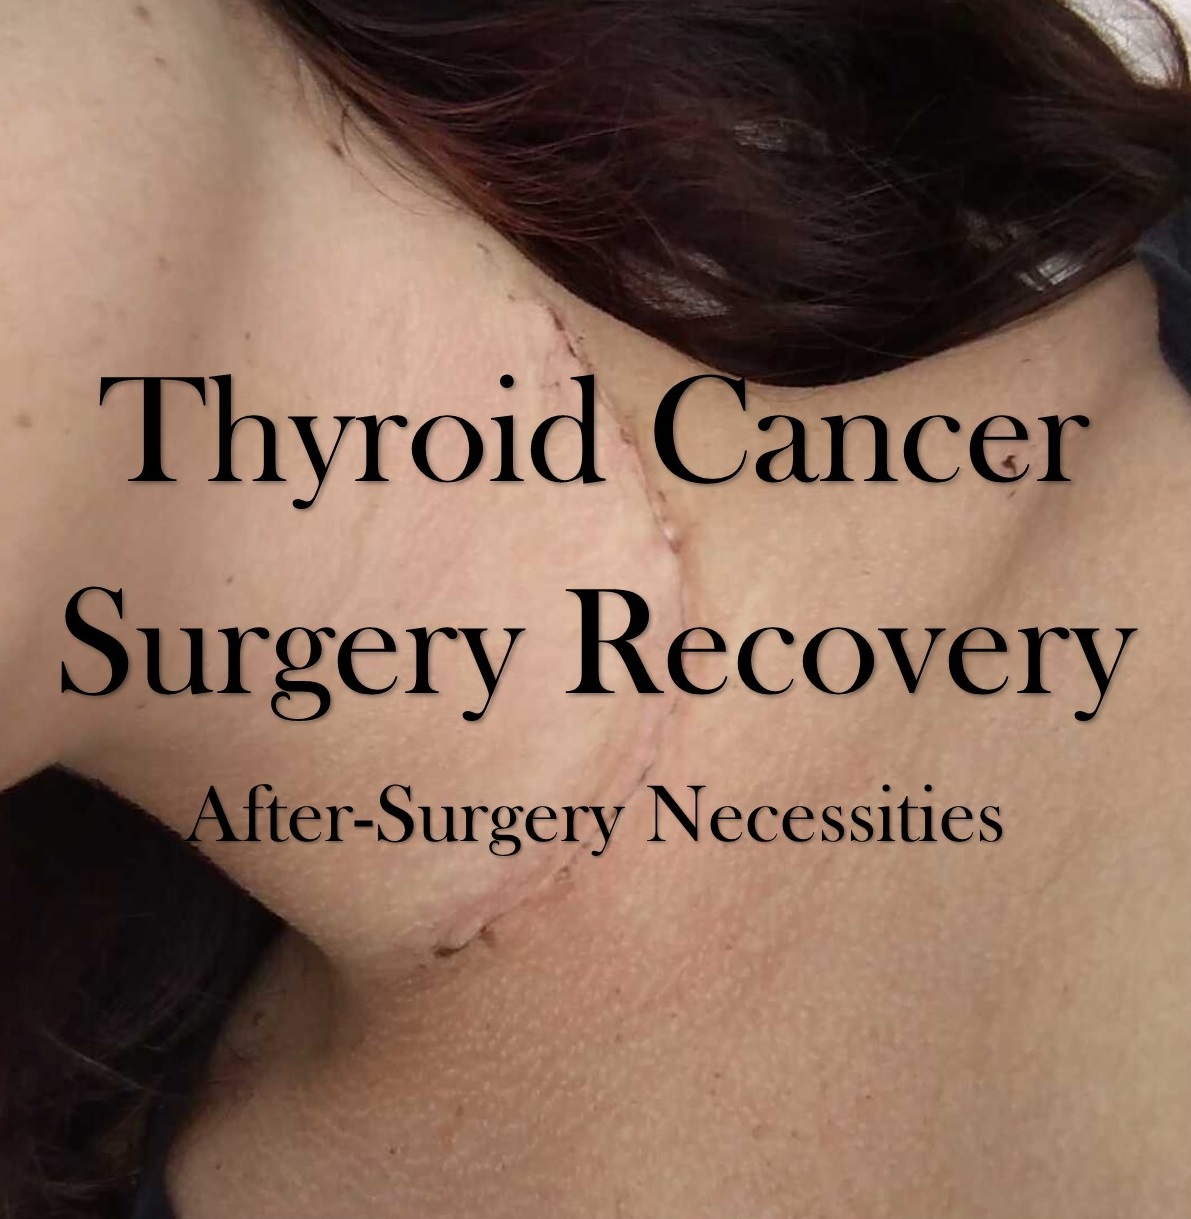 Thyroid Cancer Surgery Recovery: After-Surgery Necessities